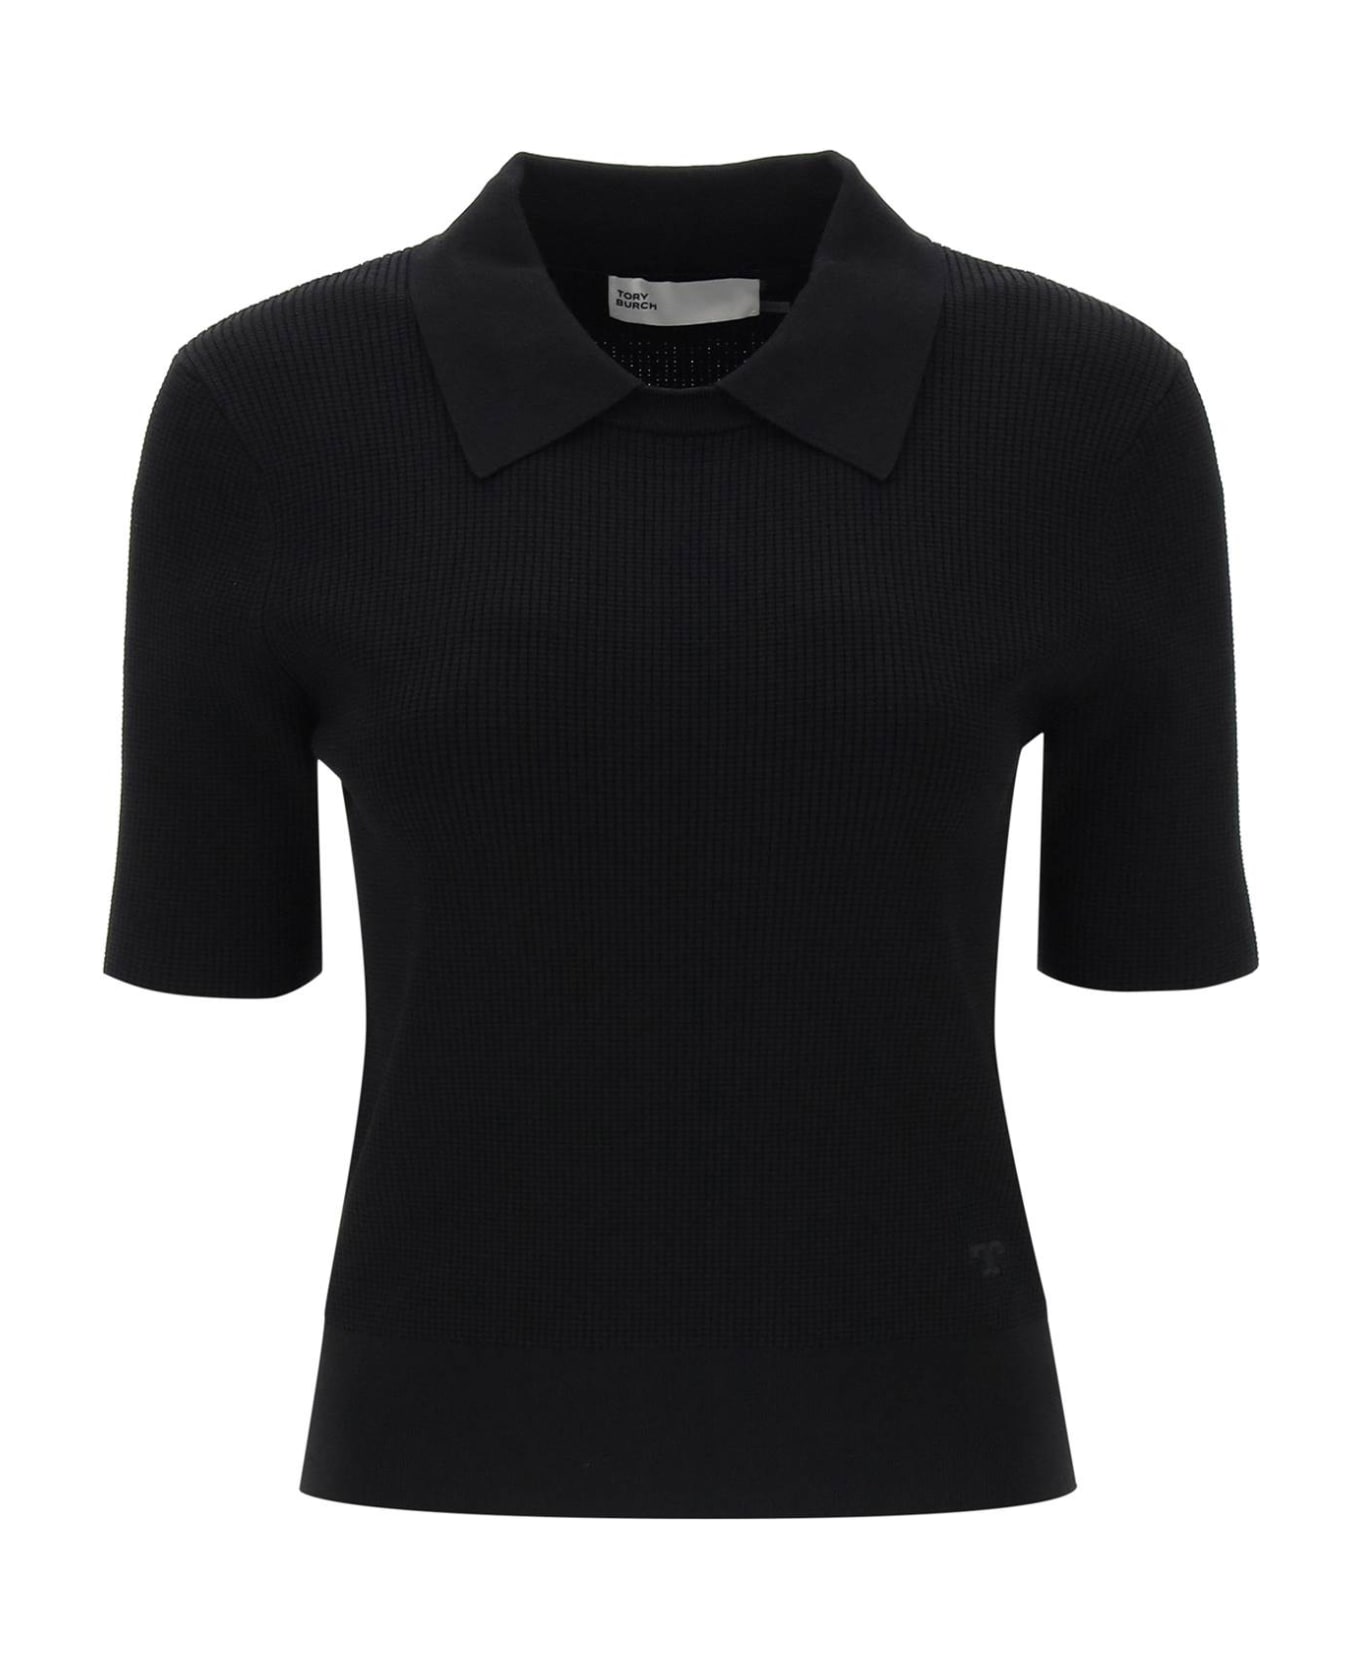 Tory Burch Knitted Polo Shirt - BLACK (Black) ポロシャツ